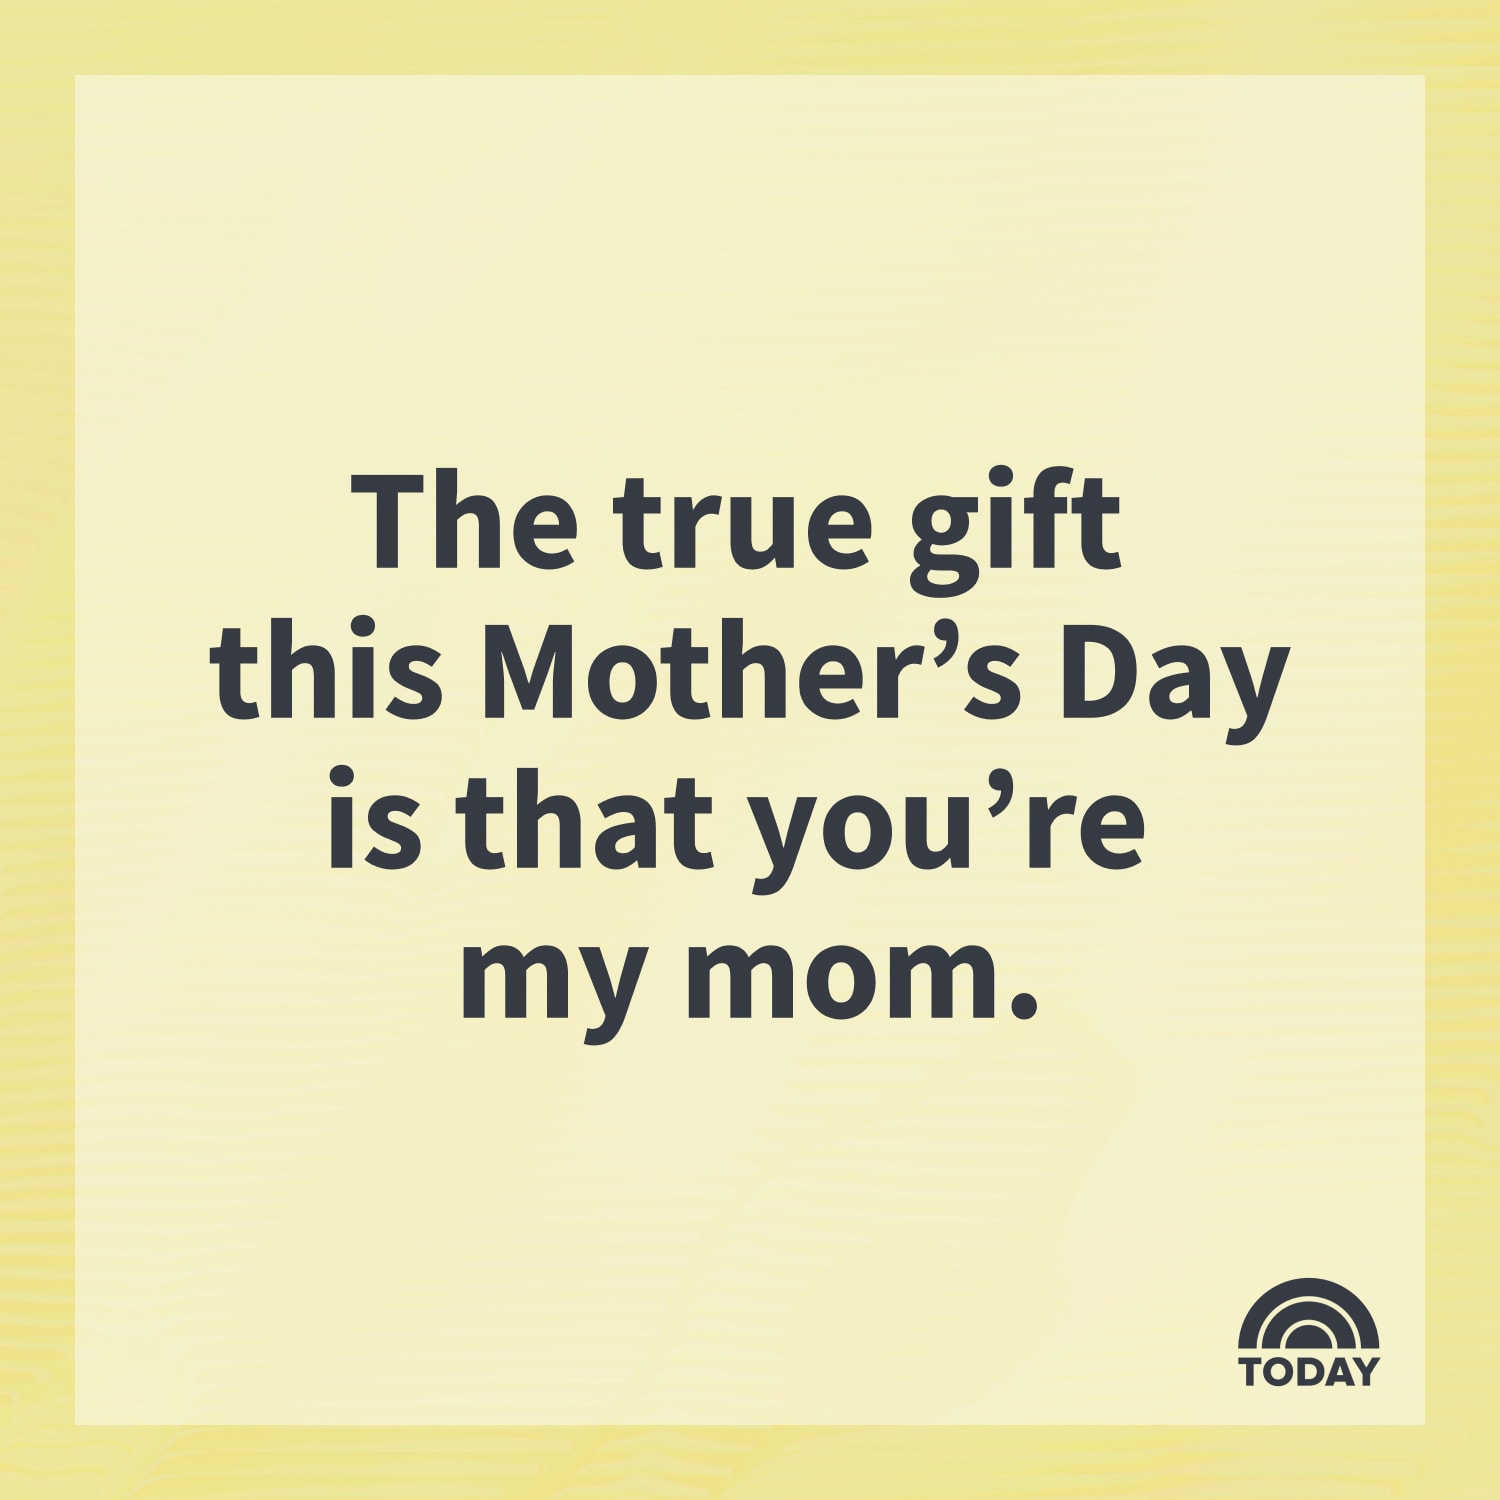 ace bluffer recommends stepmom mothers day quotes pic